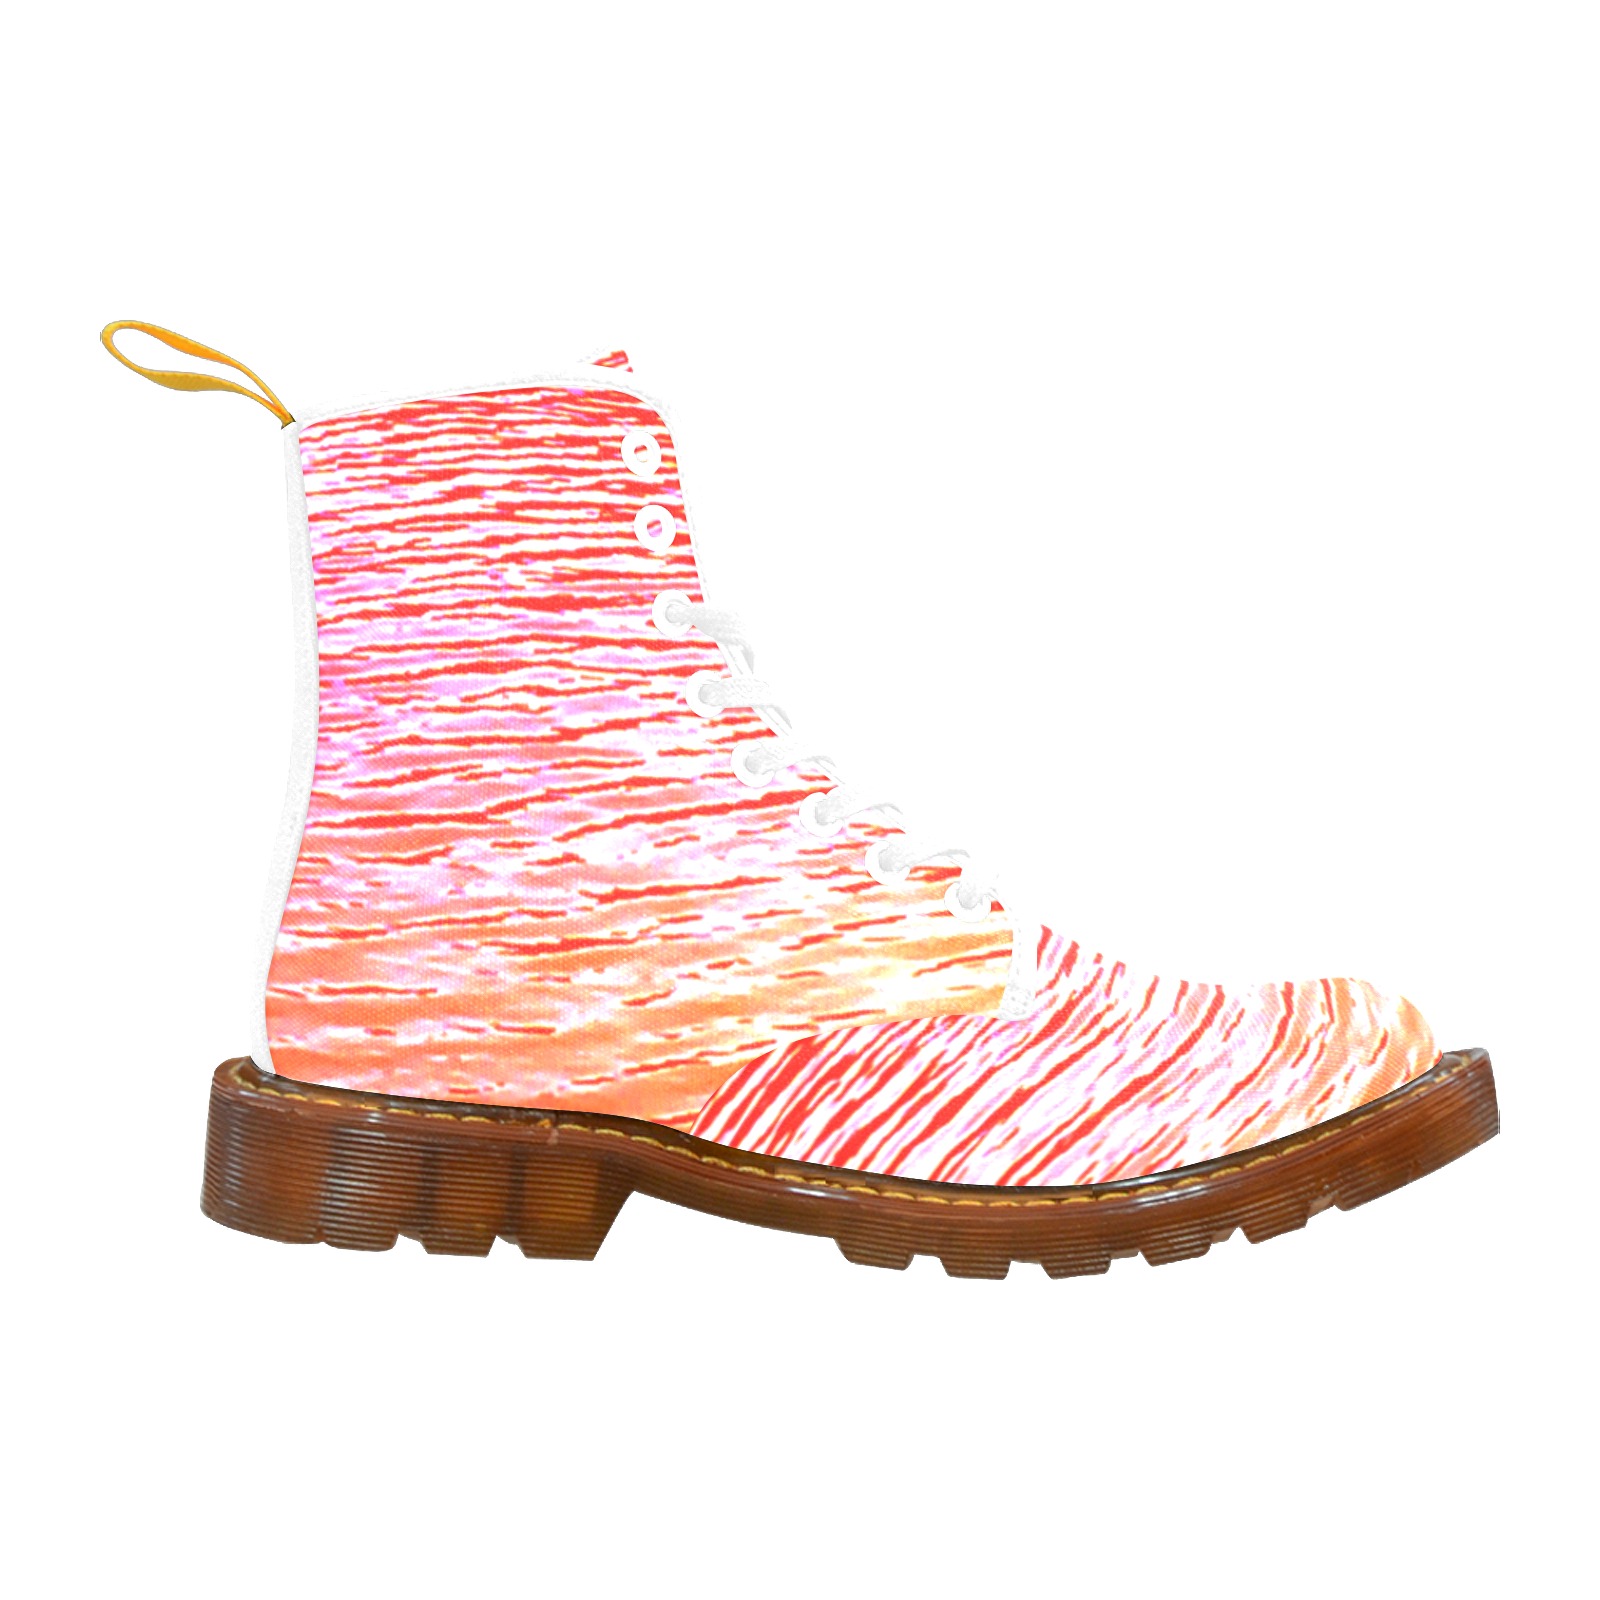 Orange and red water Martin Boots For Women Model 1203H